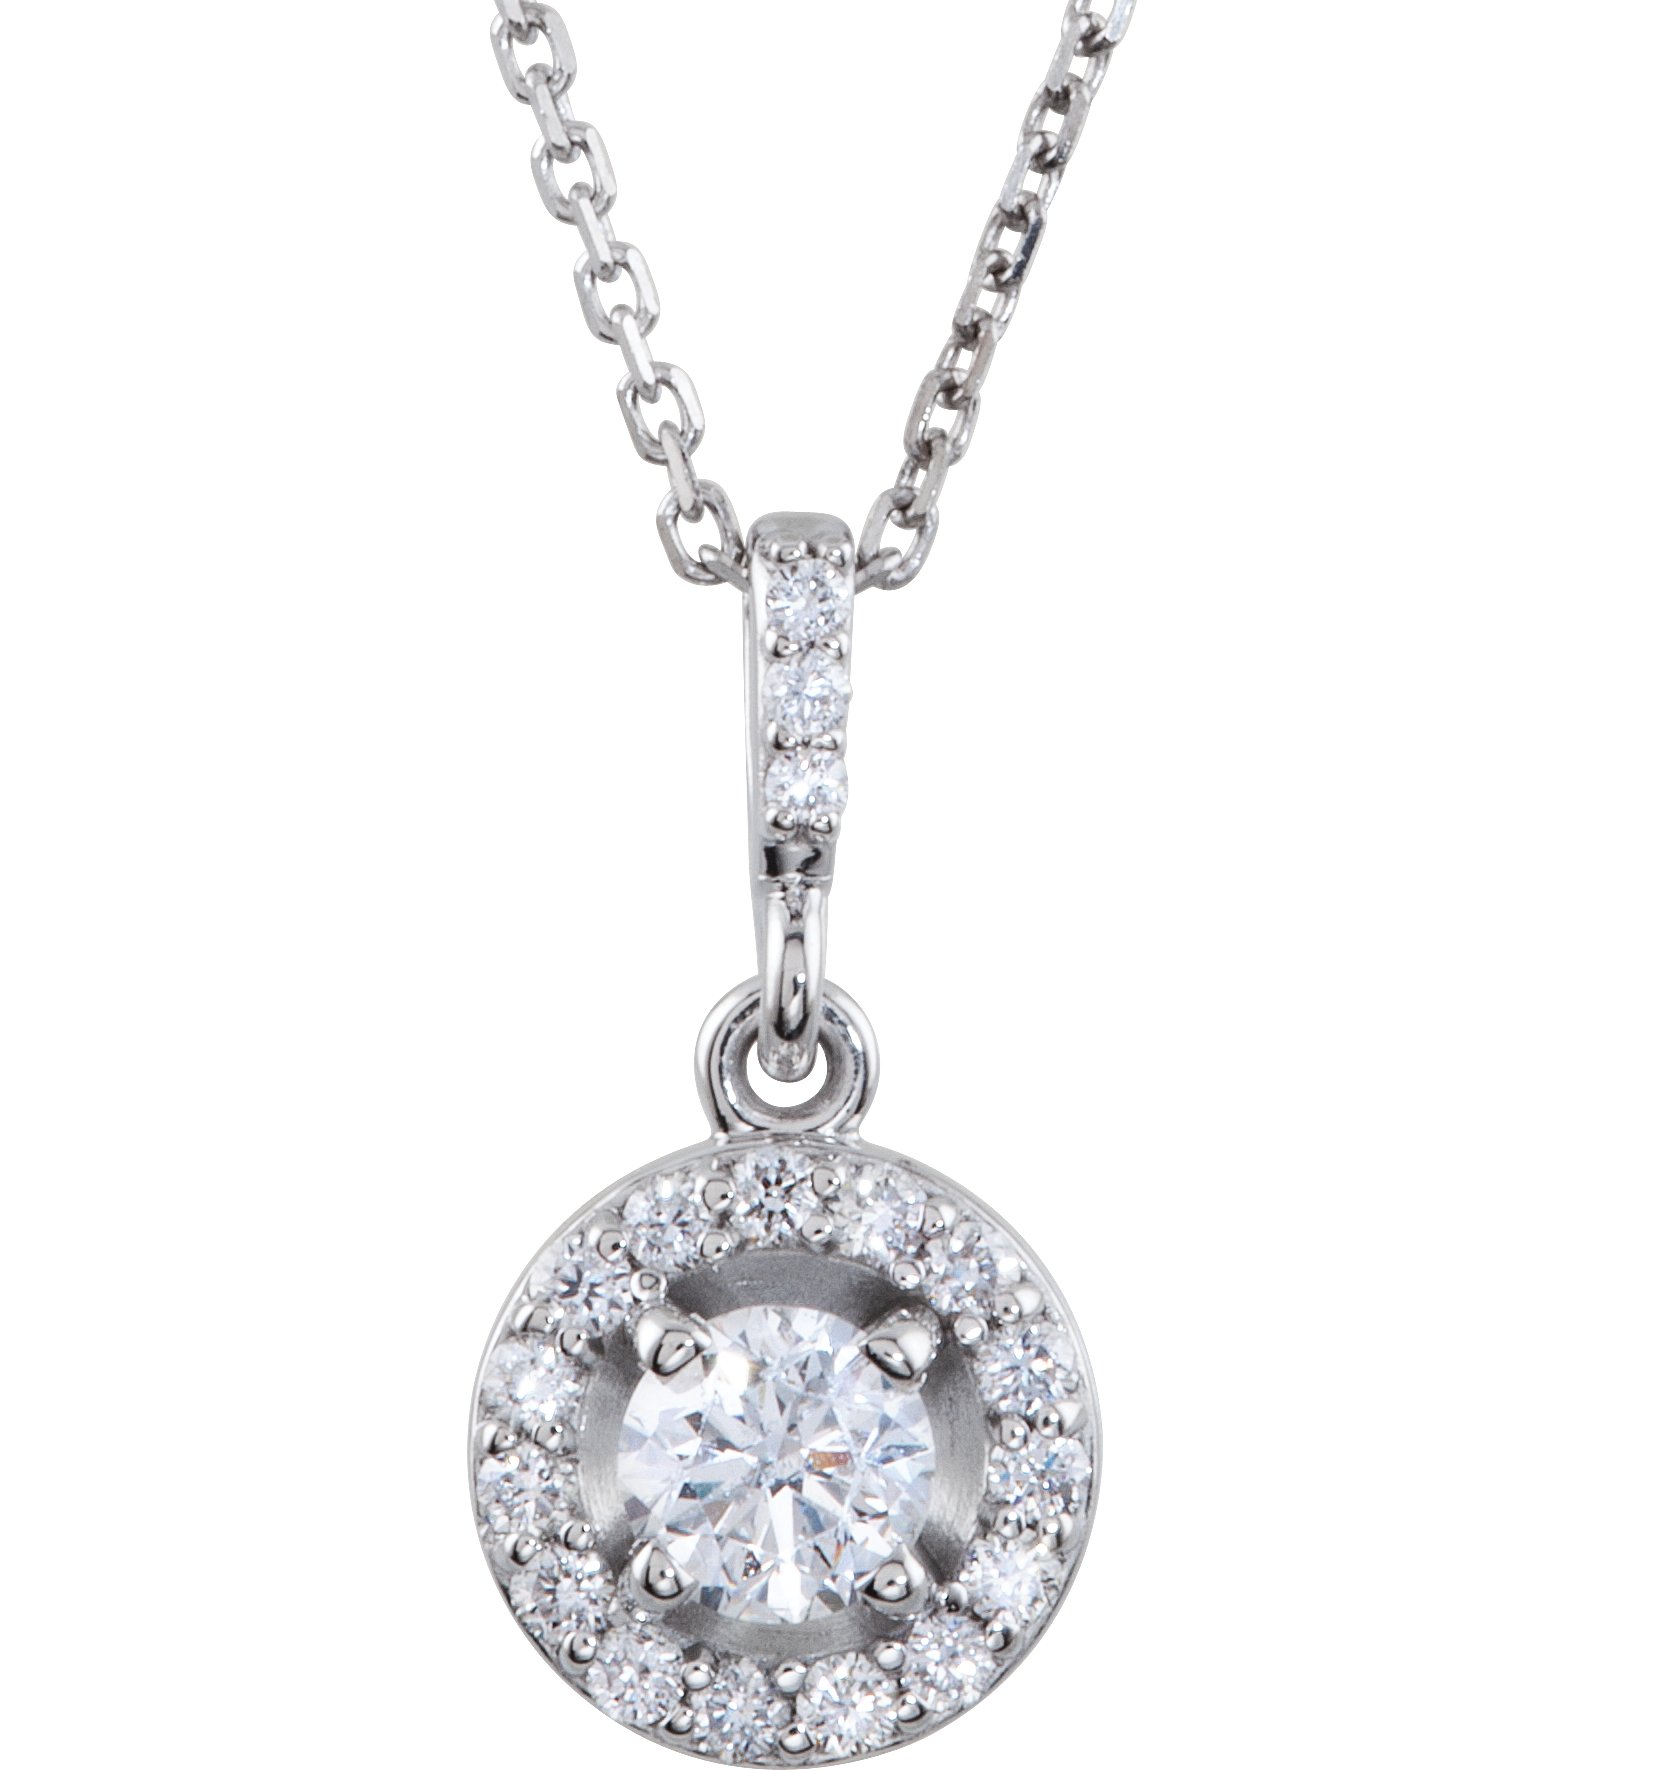 Diamond Halo-Styled Necklace or Mounting